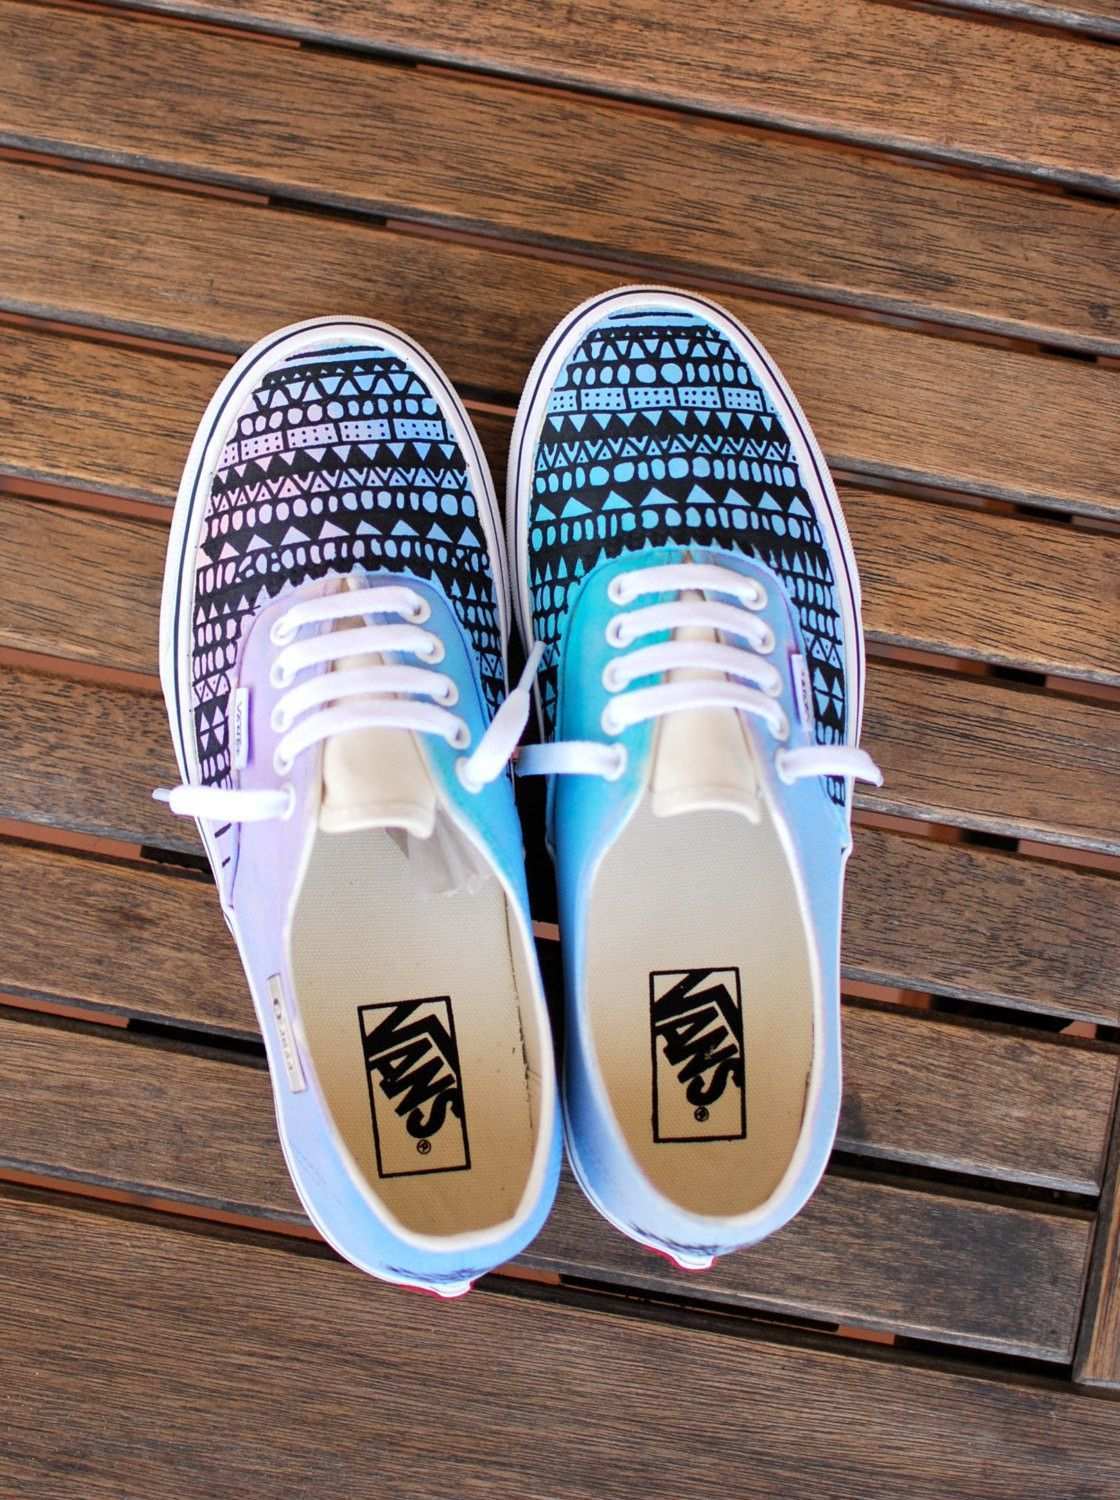 Custom Hand Painted Pastel Tribal Vans Authentic By Bstreetshoes Painted Shoes Canvas Shoes Vans Authentic Shoes